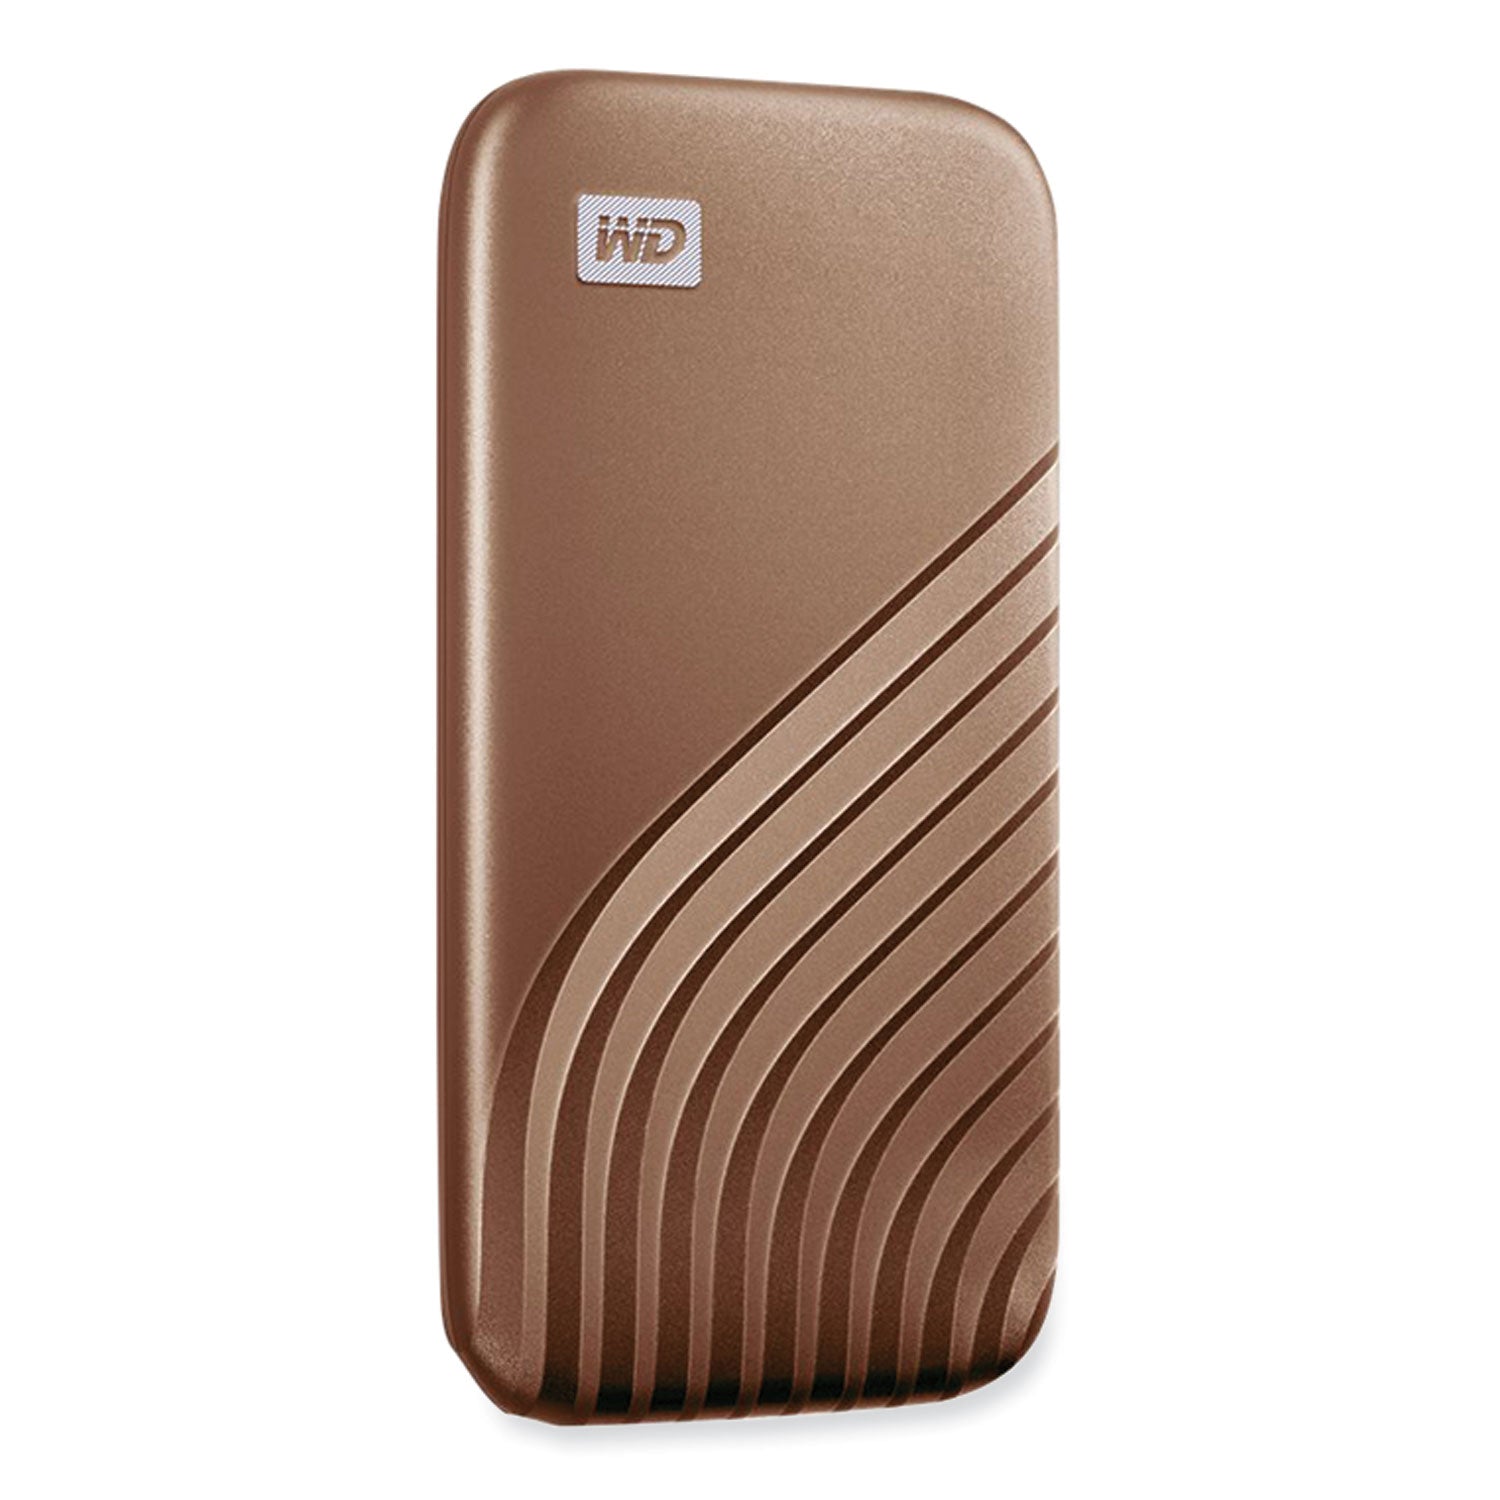 my-passport-external-solid-state-drive-1-tb-usb-32-gold_wdcagf0010bgd - 2